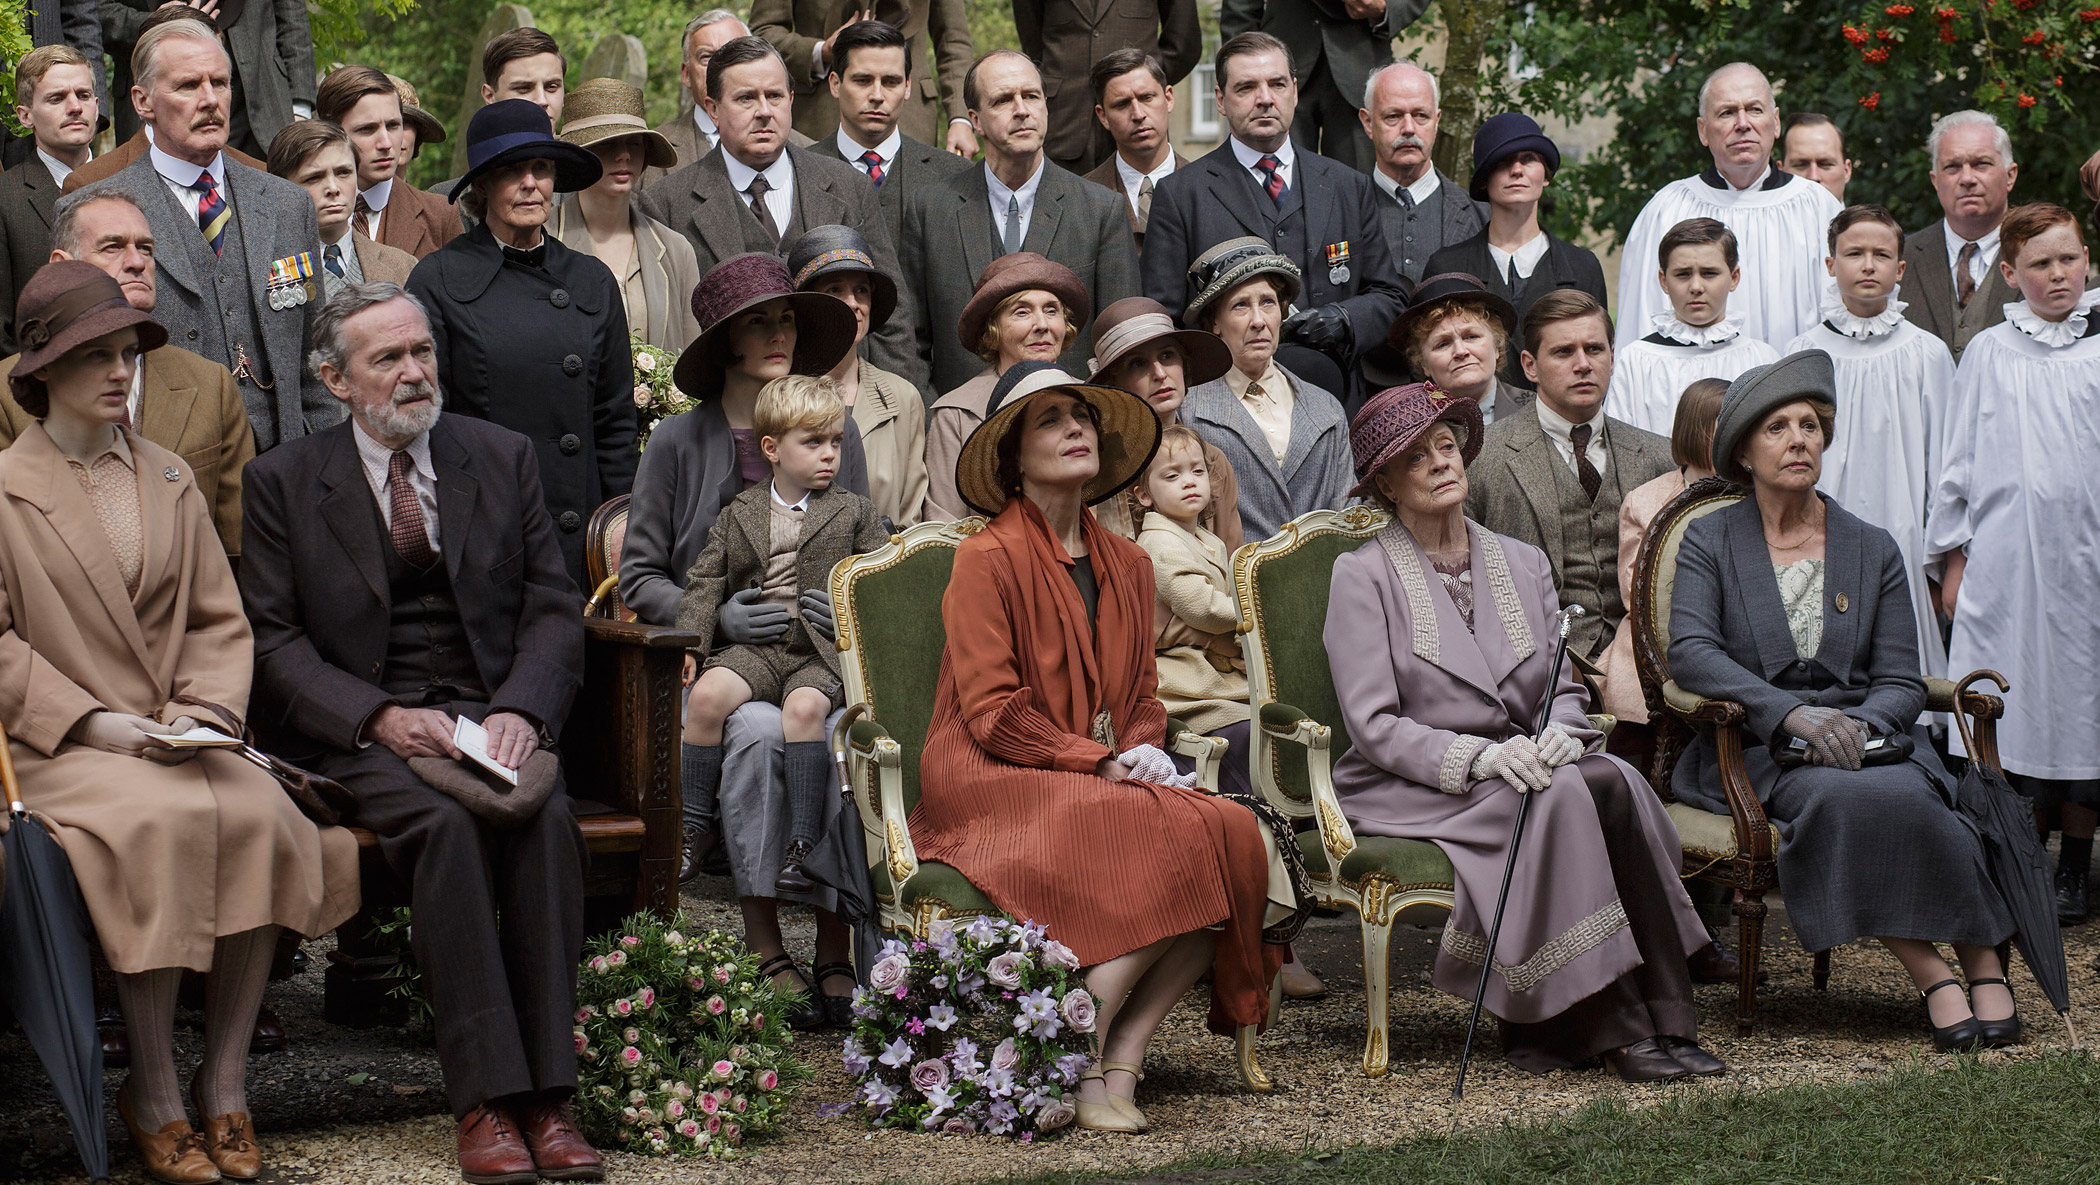 Downton Abbey Season 5 on MASTERPIECE on PBSPart EightSunday, February 22, 2015 at 9pm ETSomeone tries to derail Rose and Atticus’s happiness. Mrs. Patmore gets a surprise. Anna isin trouble. Robert has a revelation.(C) Nick Briggs/Carnival Films 2014 for MASTERPIECEThis image may be used only in the direct promotion of MASTERPIECE CLASSIC. No other rights are granted. All rights are reserved. Editorial use only. USE ON THIRD PARTY SITES SUCH AS FACEBOOK AND TWITTER IS NOT ALLOWED.